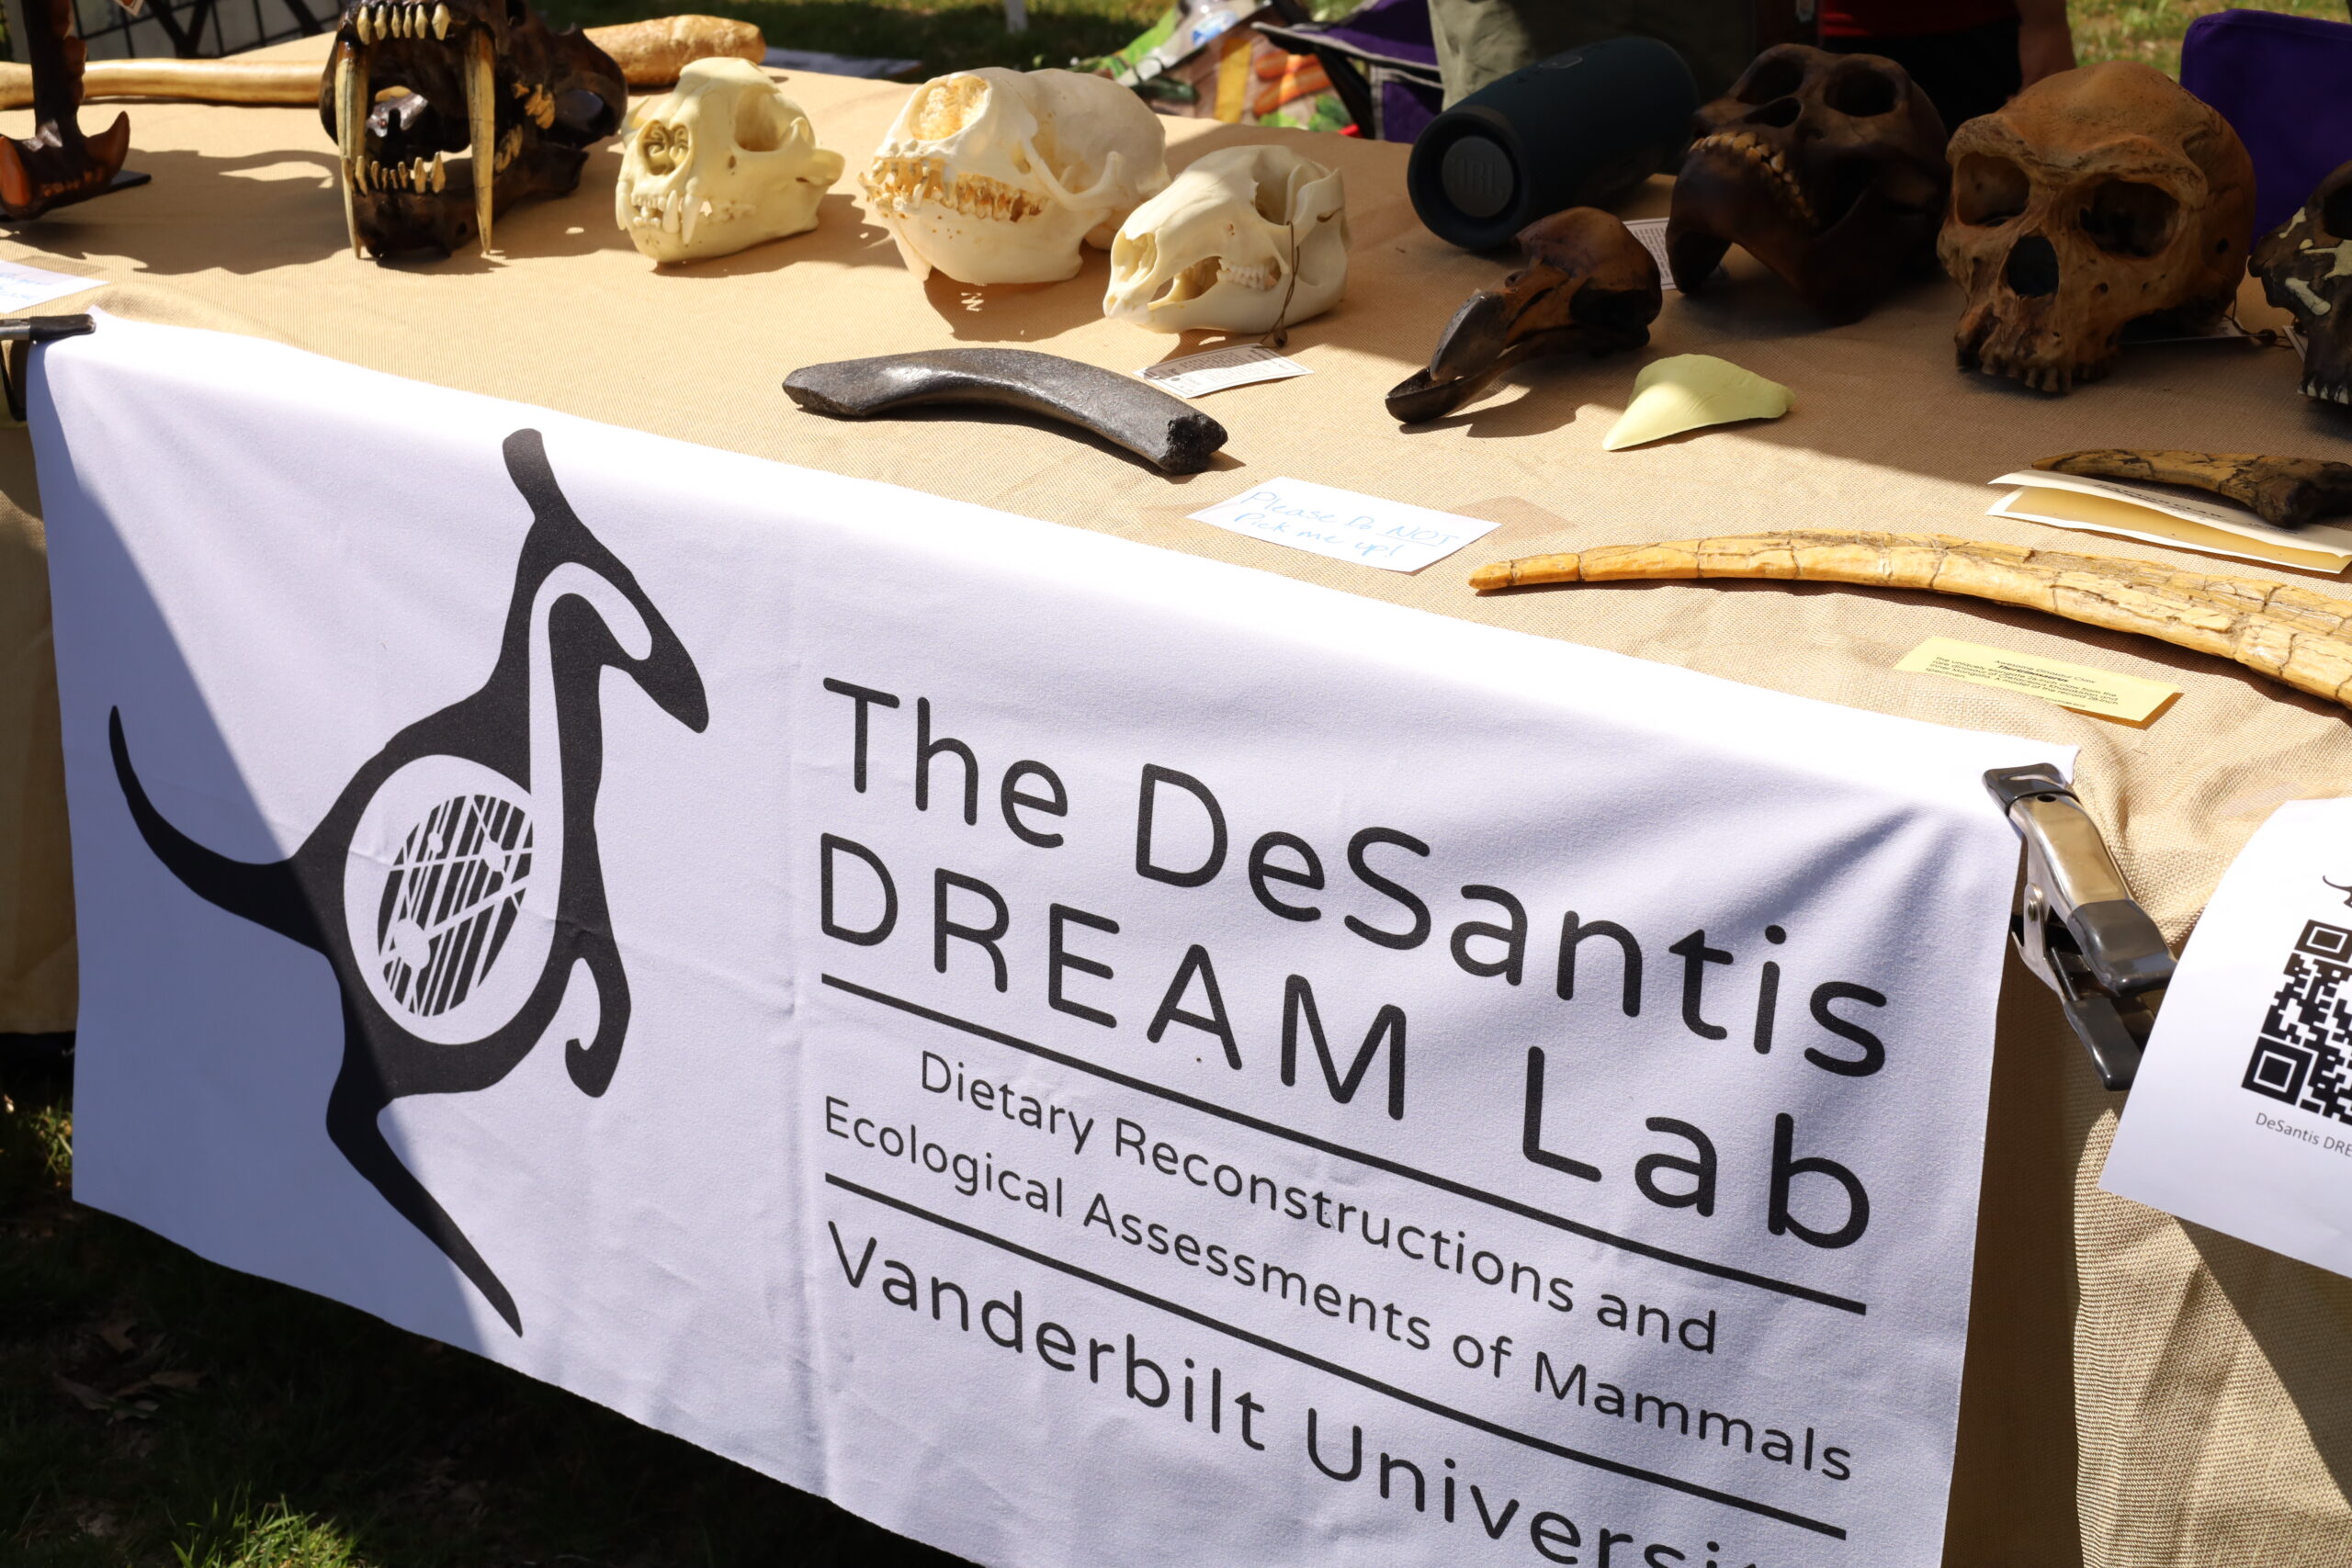 Table with casts of skull fossils and a banner for the DeSantis DREAM Lab